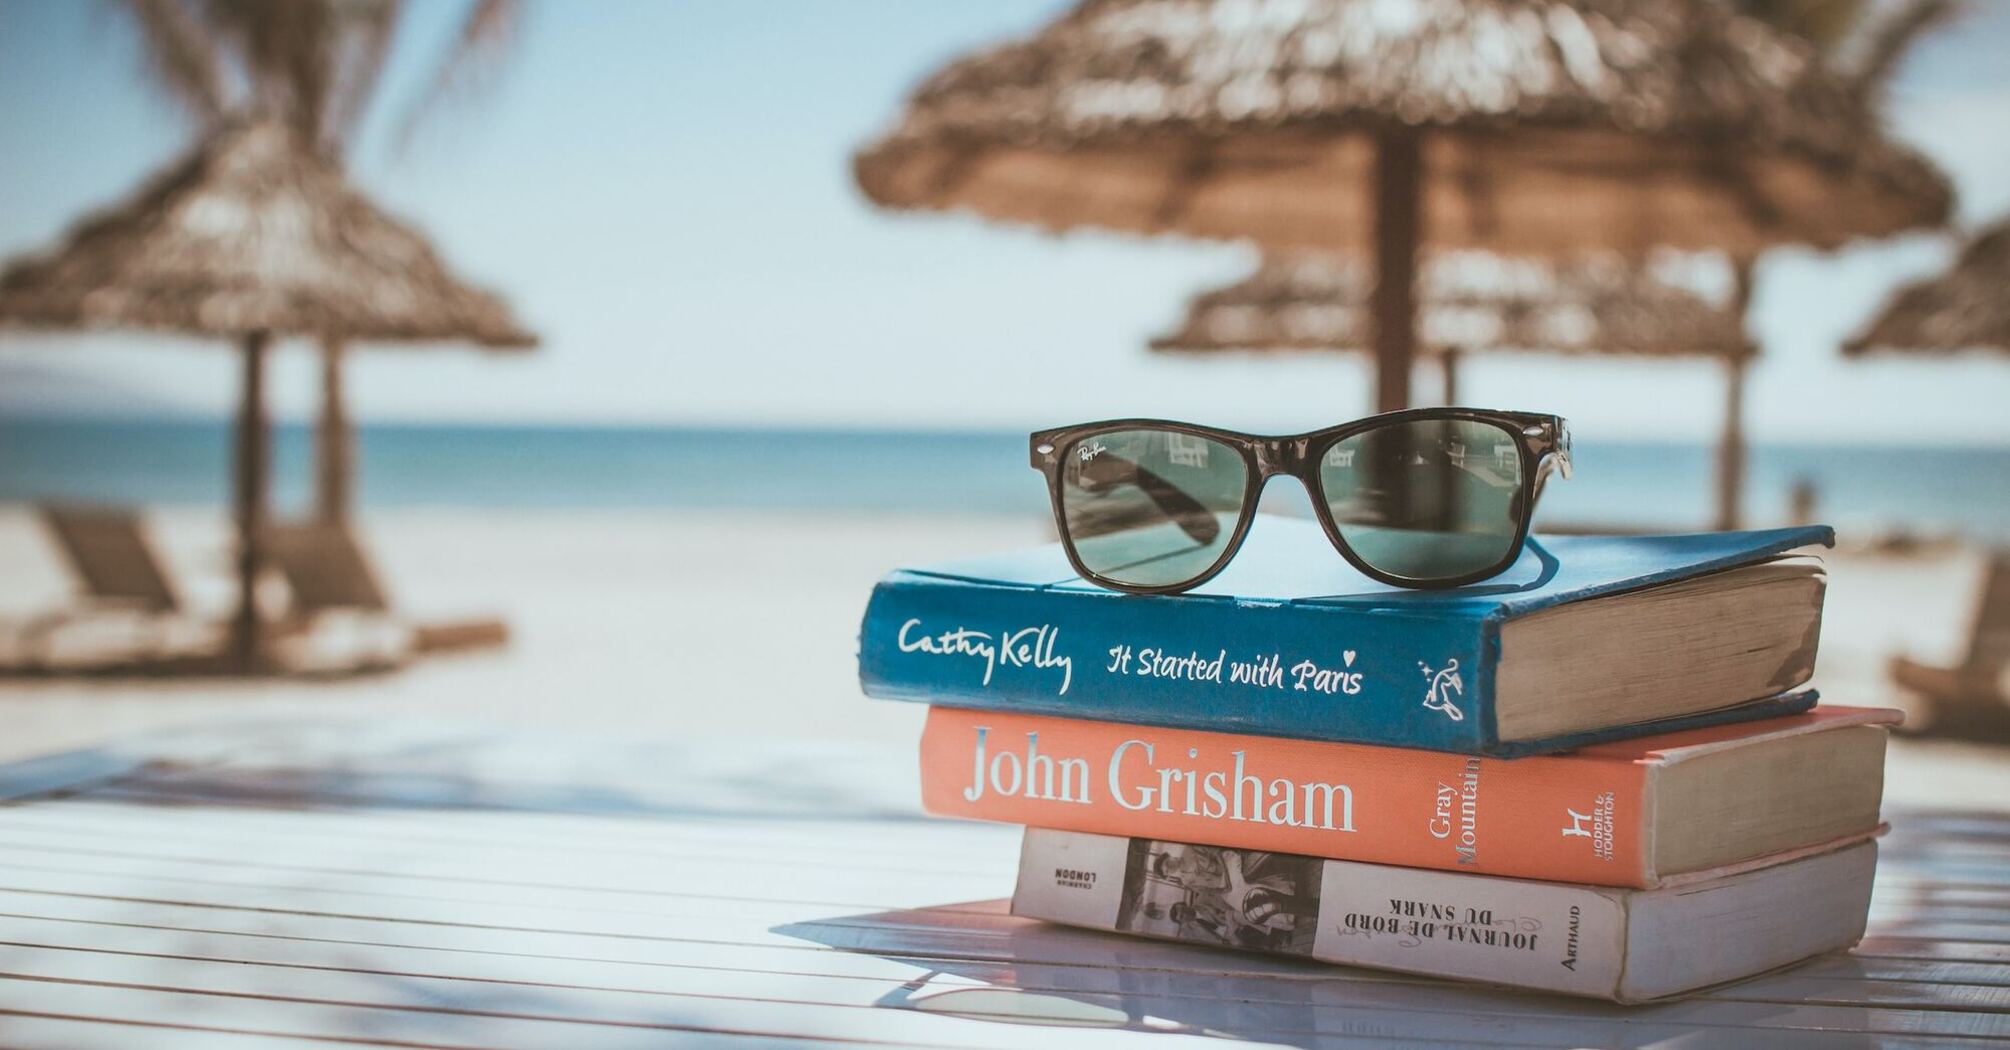 A stack of books and sunglasses against the backdrop of beach umbrellas and sun loungers